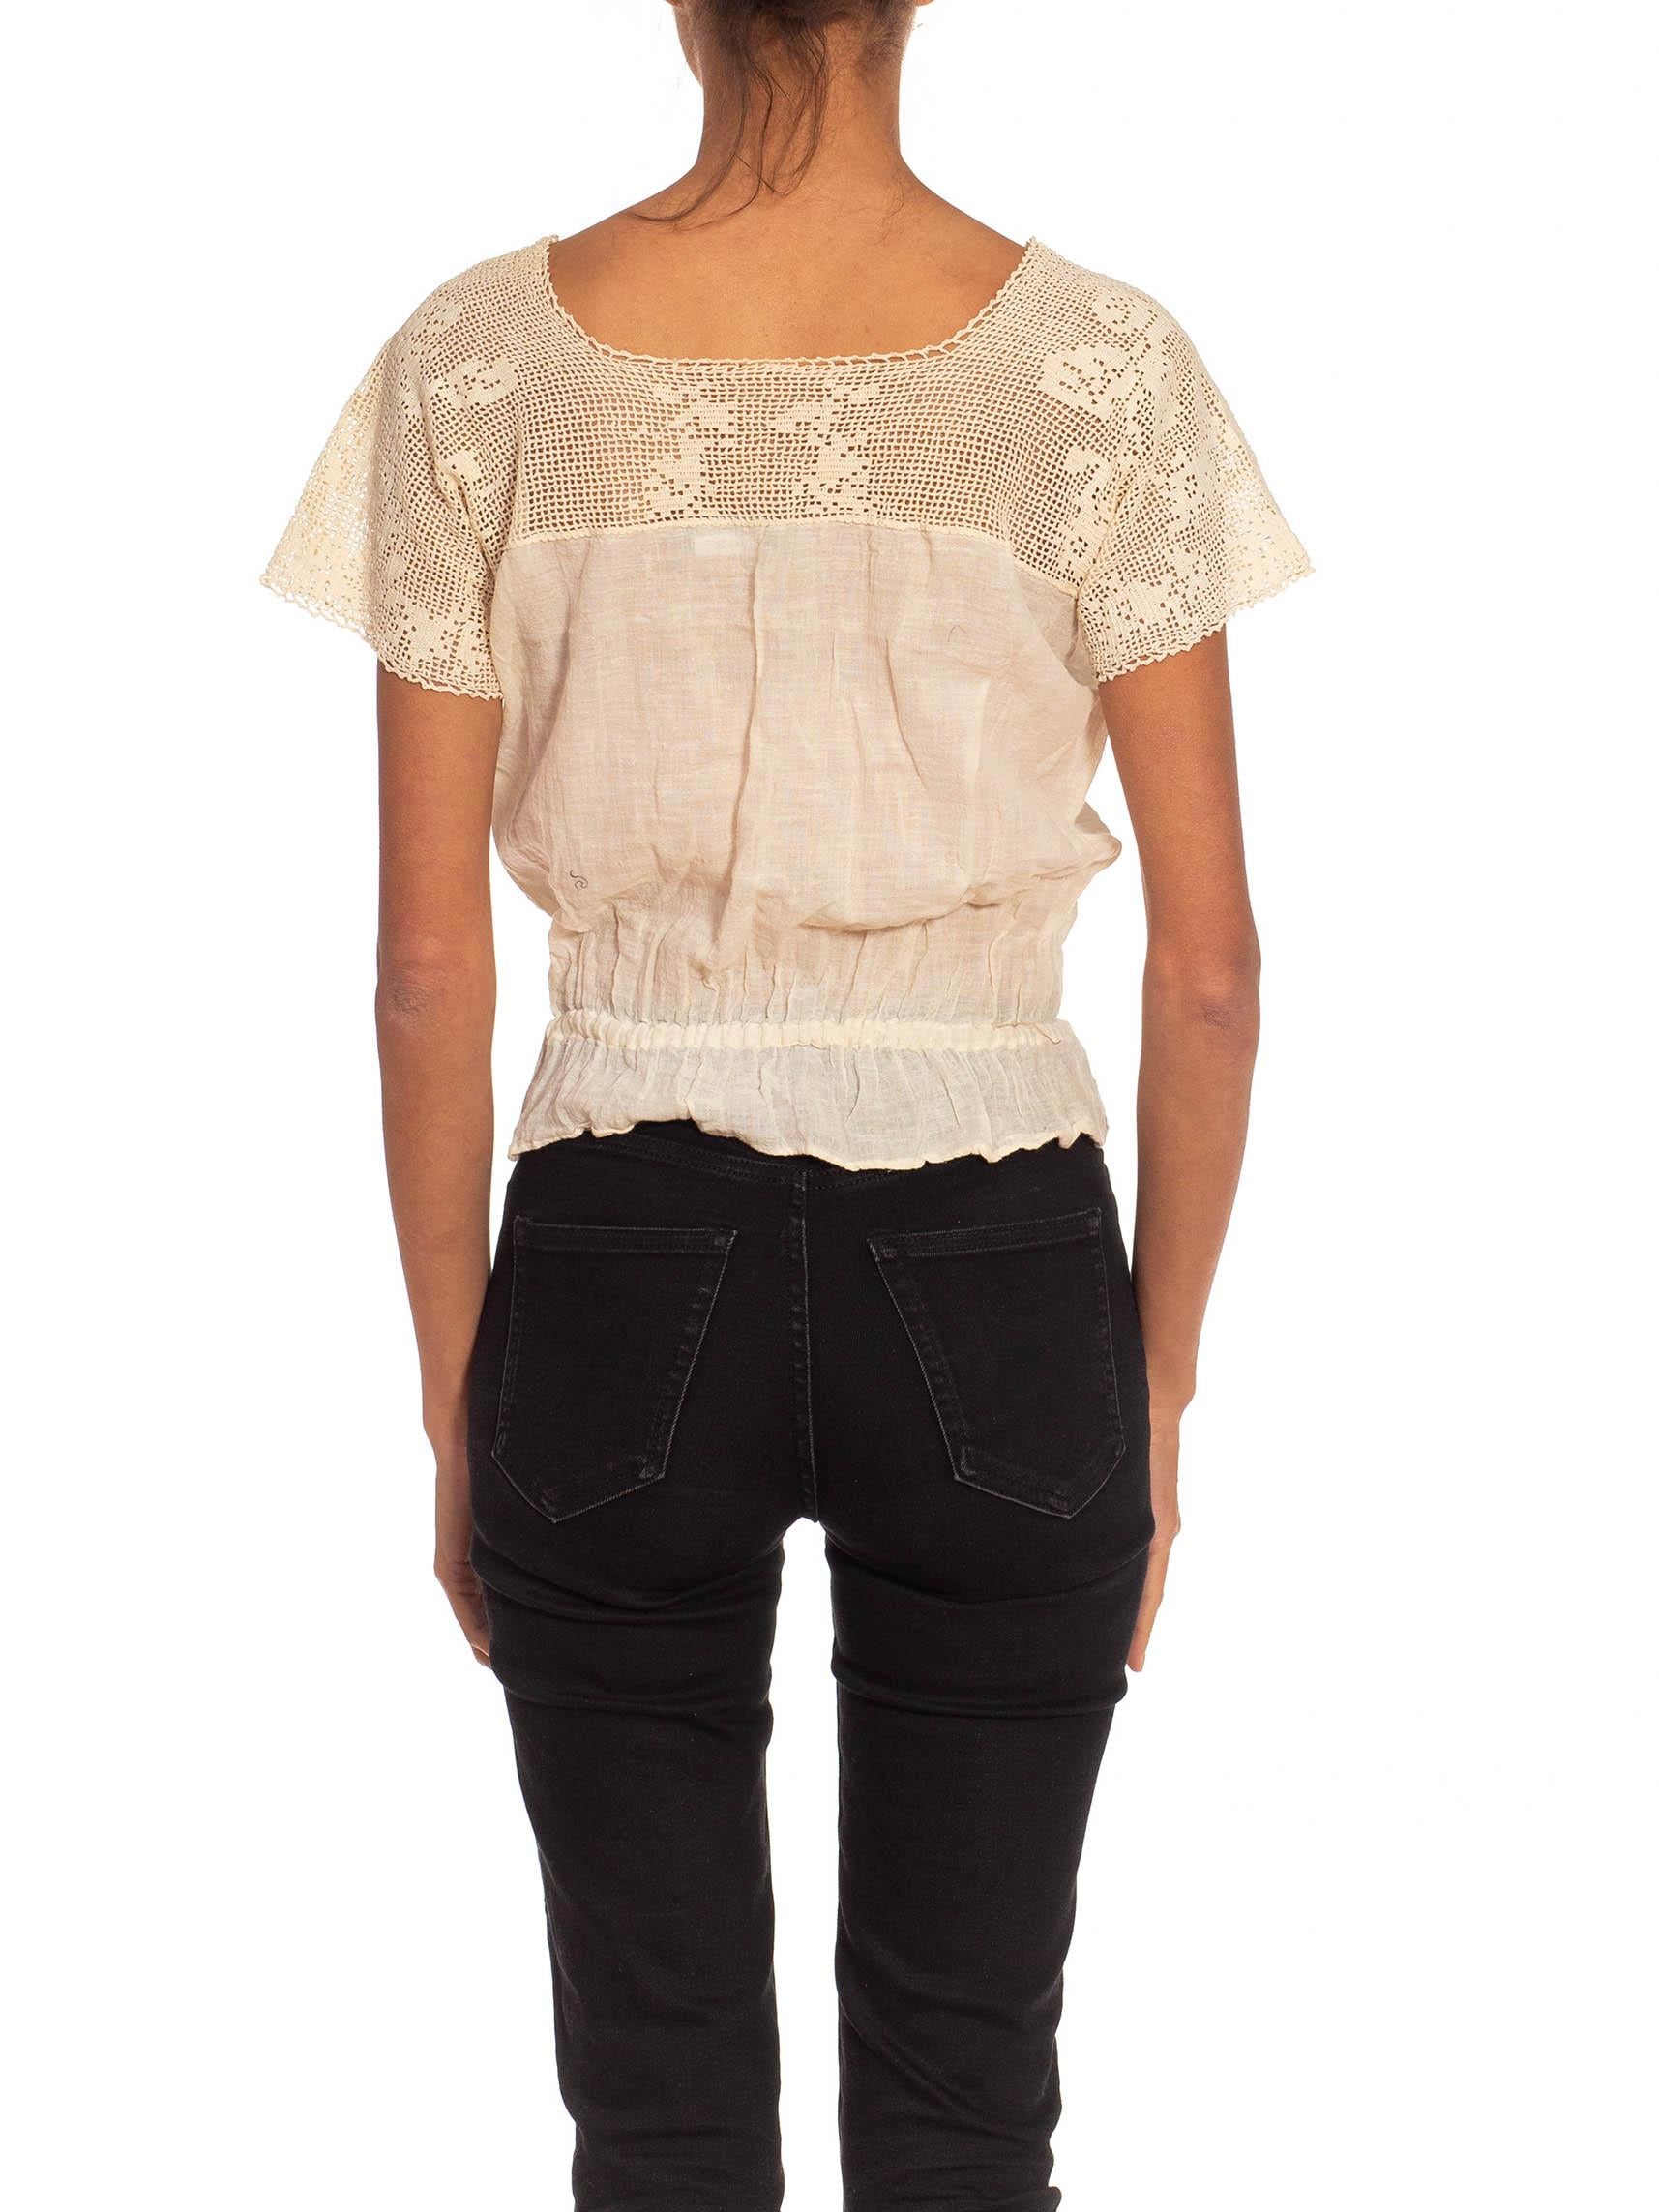 Victorian Off White Cotton Lace Top With Elastic Waist For Sale 6